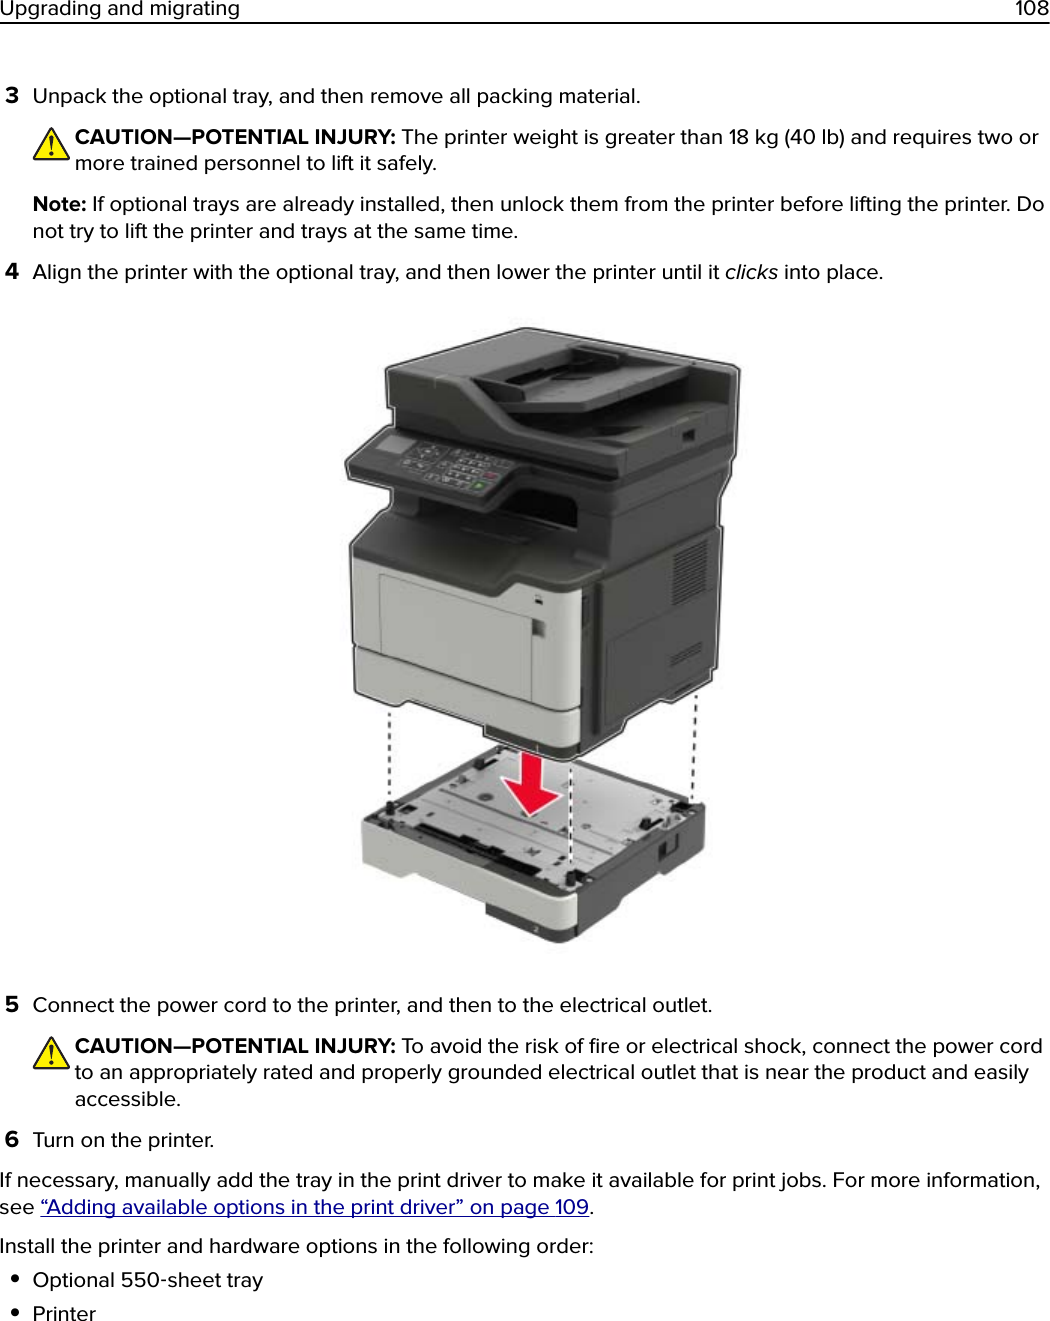 3Unpack the optional tray, and then remove all packing material.CAUTION—POTENTIAL INJURY: The printer weight is greater than 18 kg (40 lb) and requires two ormore trained personnel to lift it safely.Note: If optional trays are already installed, then unlock them from the printer before lifting the printer. Donot try to lift the printer and trays at the same time.4Align the printer with the optional tray, and then lower the printer until it clicks into place.5Connect the power cord to the printer, and then to the electrical outlet.CAUTION—POTENTIAL INJURY: To avoid the risk of ﬁre or electrical shock, connect the power cordto an appropriately rated and properly grounded electrical outlet that is near the product and easilyaccessible.6Turn on the printer.If necessary, manually add the tray in the print driver to make it available for print jobs. For more information,see “Adding available options in the print driver” on page 109.Install the printer and hardware options in the following order:•Optional 550‑sheet tray•PrinterUpgrading and migrating 108